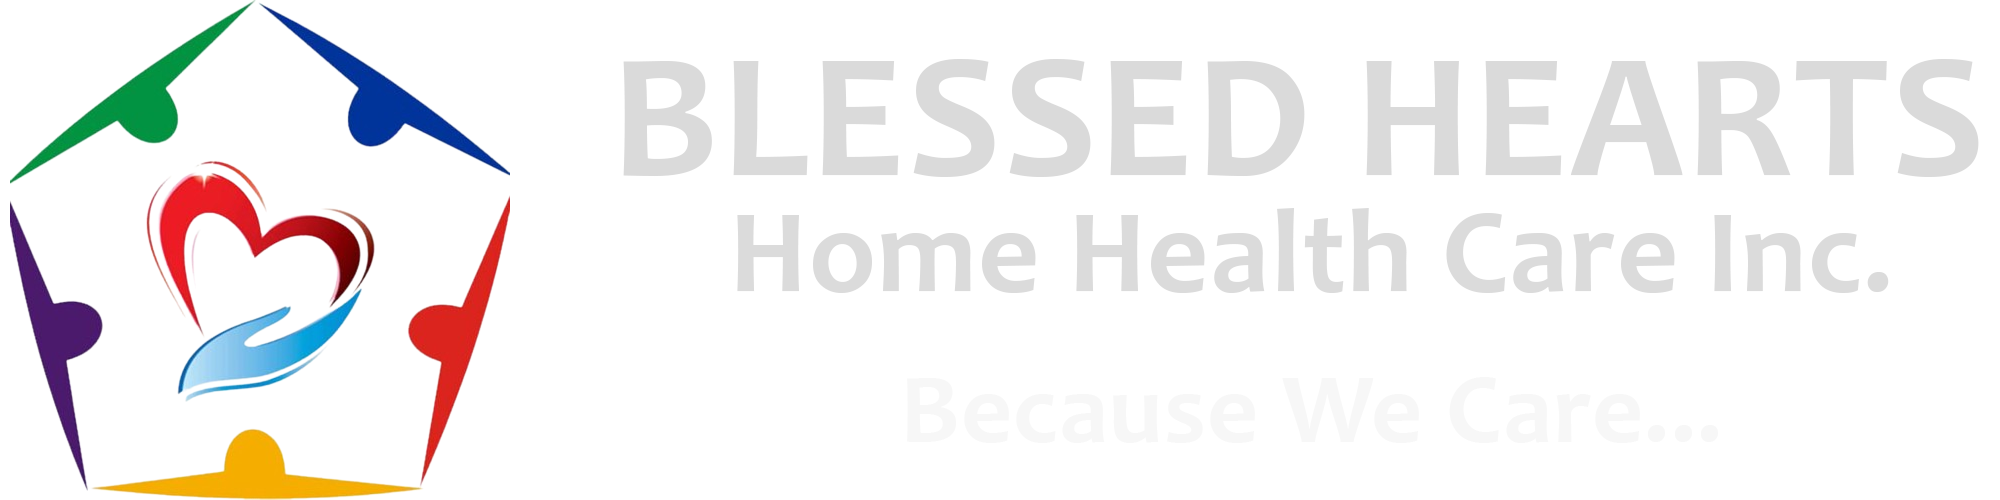 Blessed Hearts Home Health Care Inc.